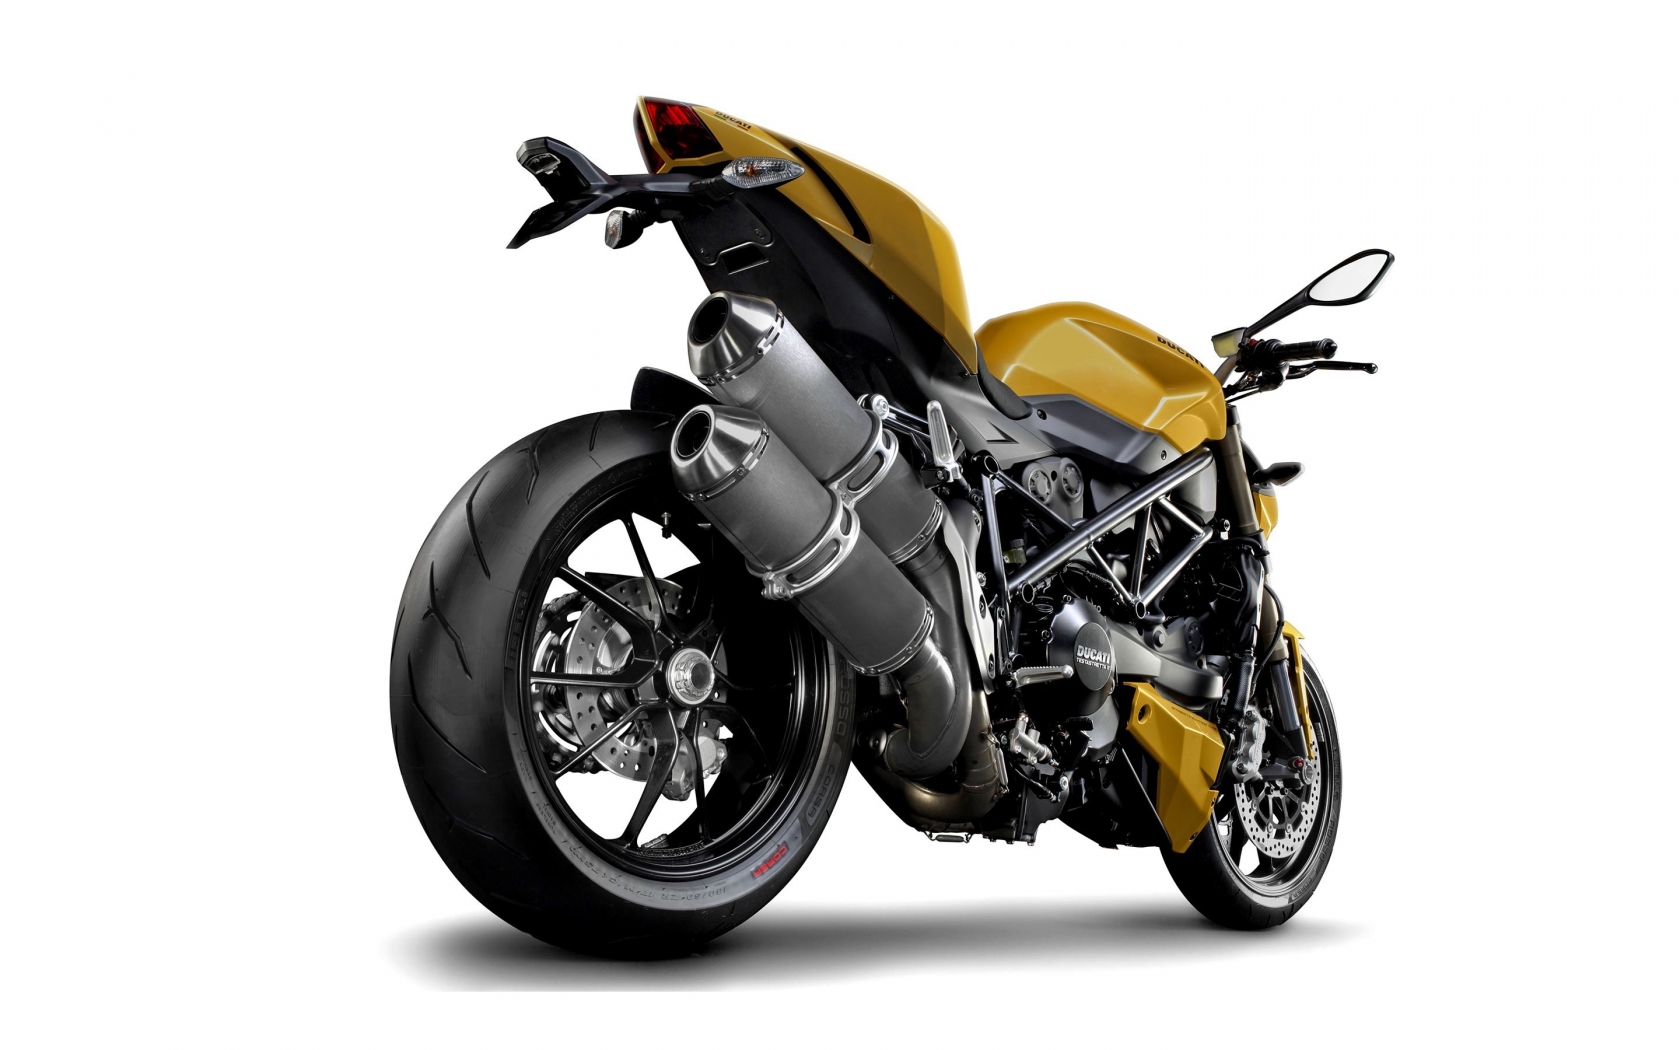  Ducati Streetfighter Rear for 1680 x 1050 widescreen resolution